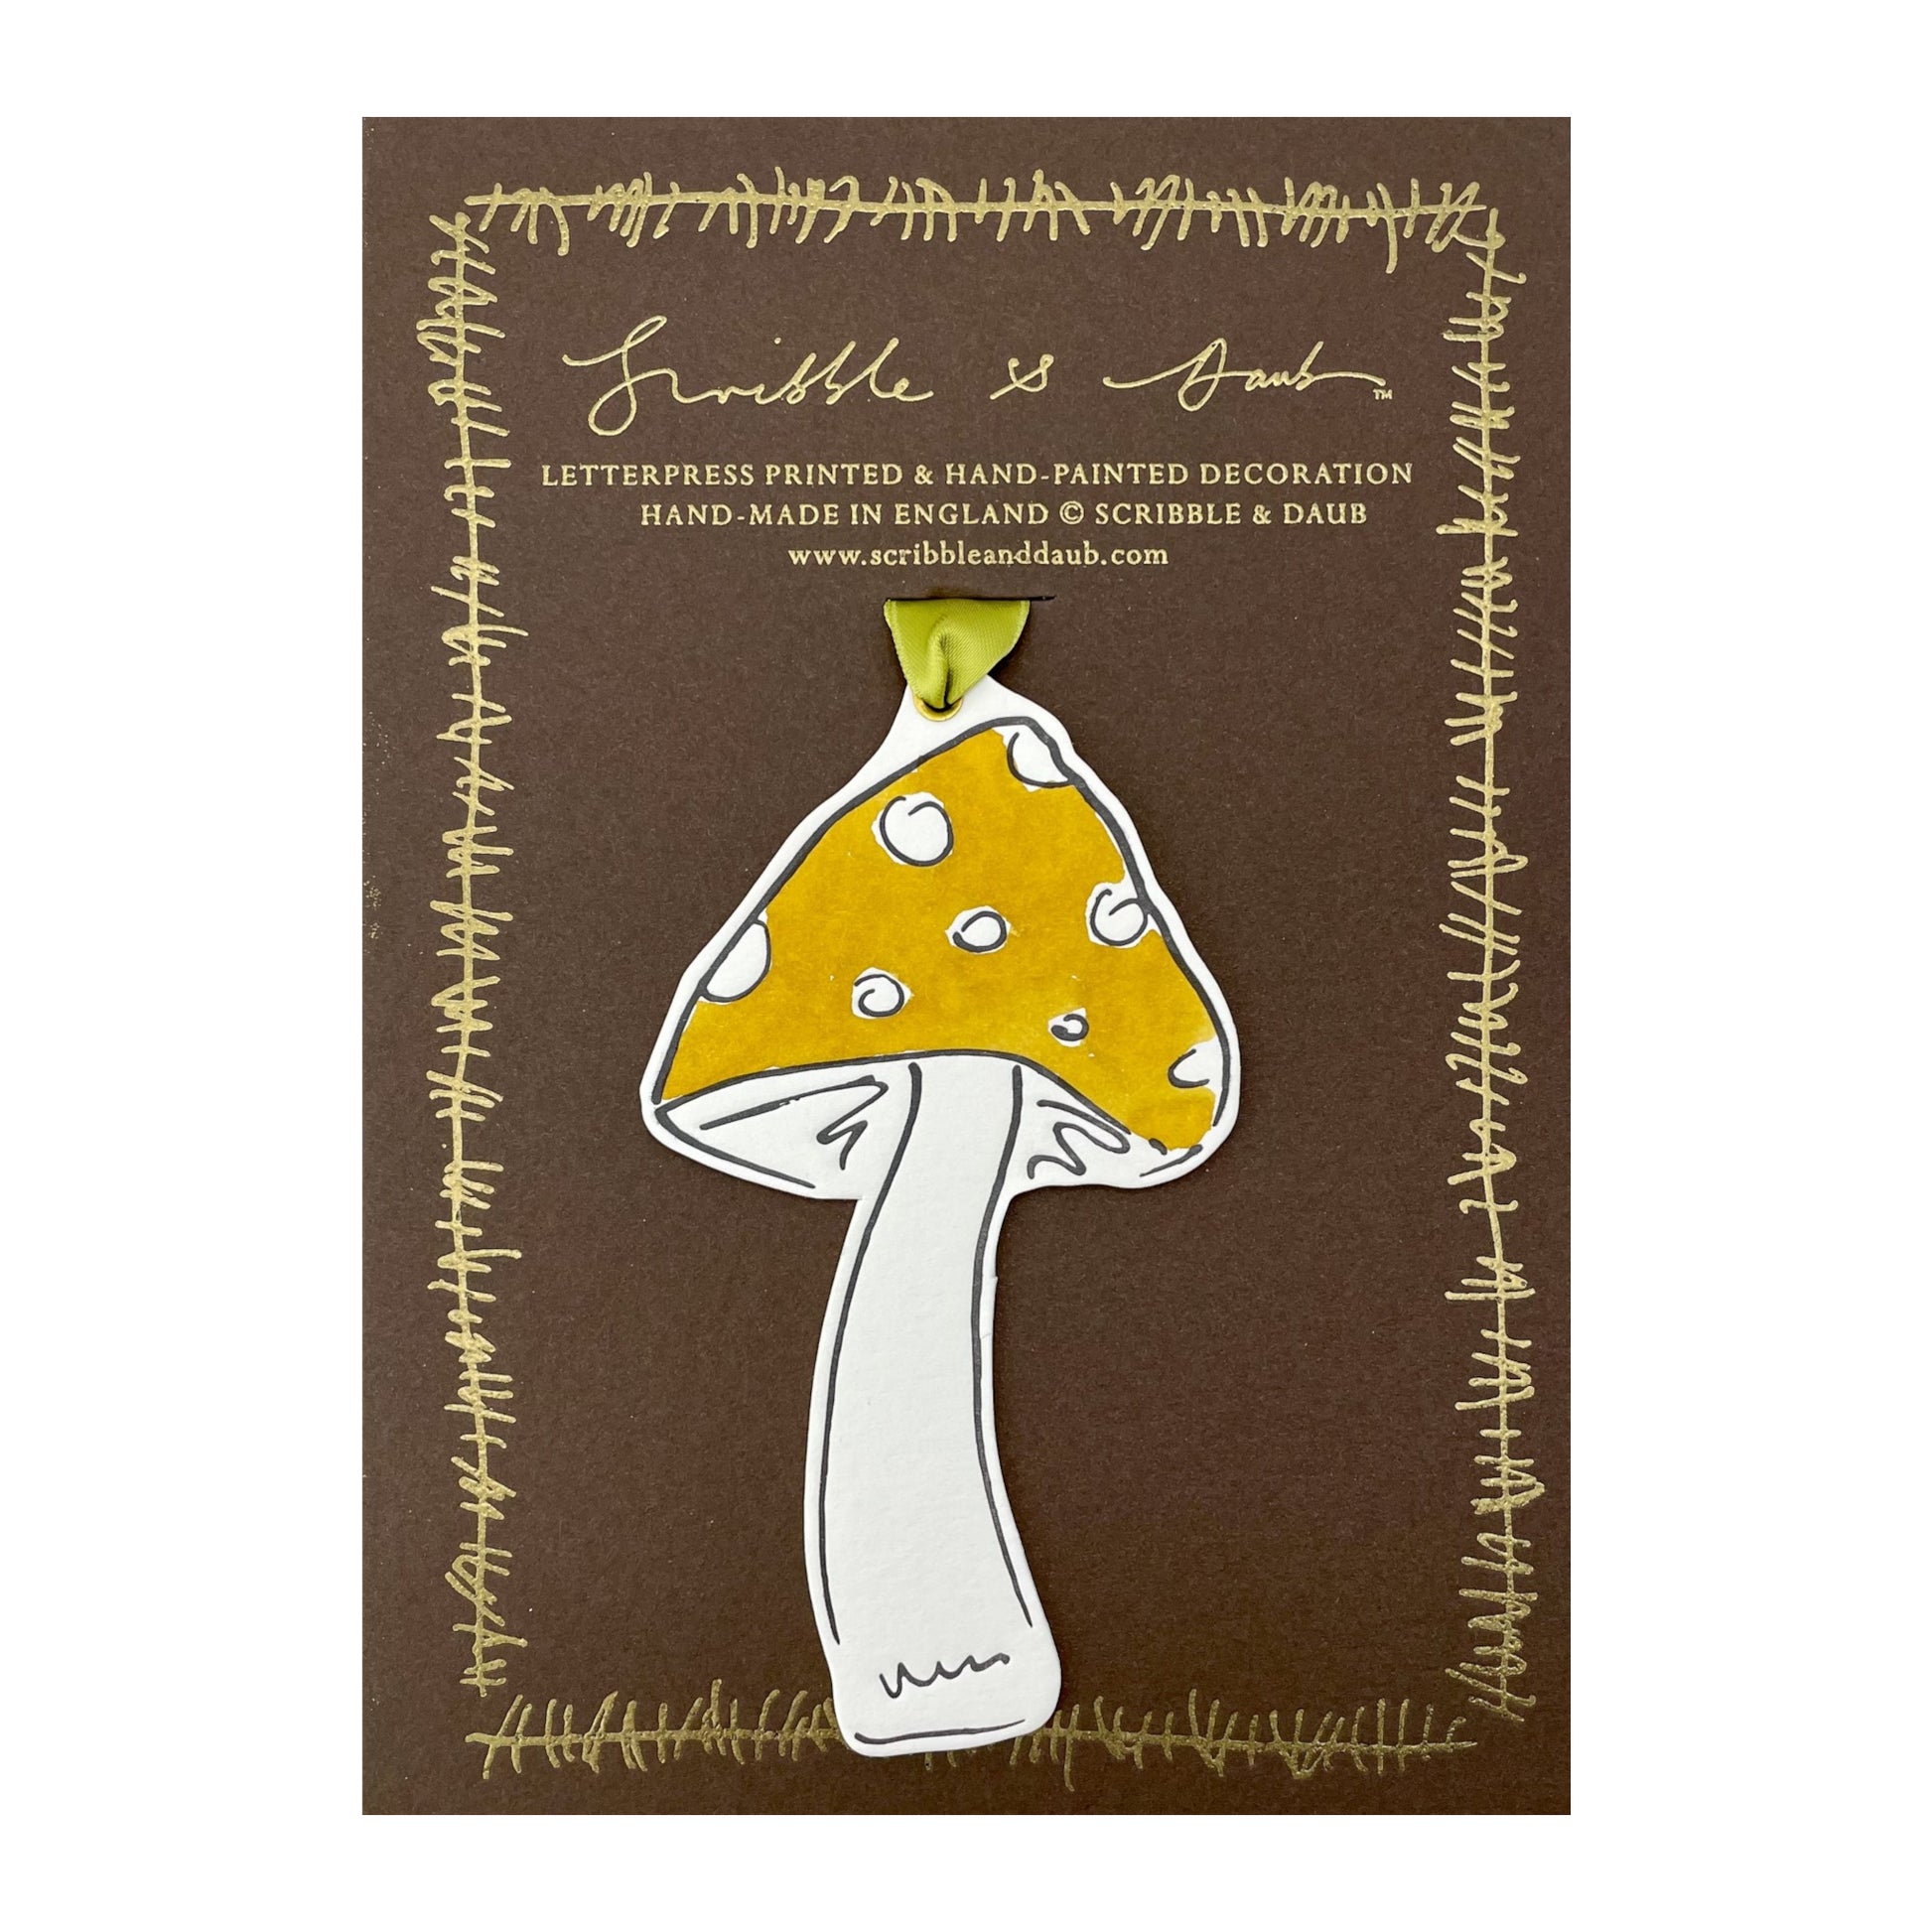 a mushroom shaped hanging ornament made of thick 1050gsm off-white card, letterpress printed in black and then hand painted in ochre ink. It has a chartreuse green satin ribbon to hang the ornament with. By Scribble & Daub. Pictured on a gold-foiled brown board.